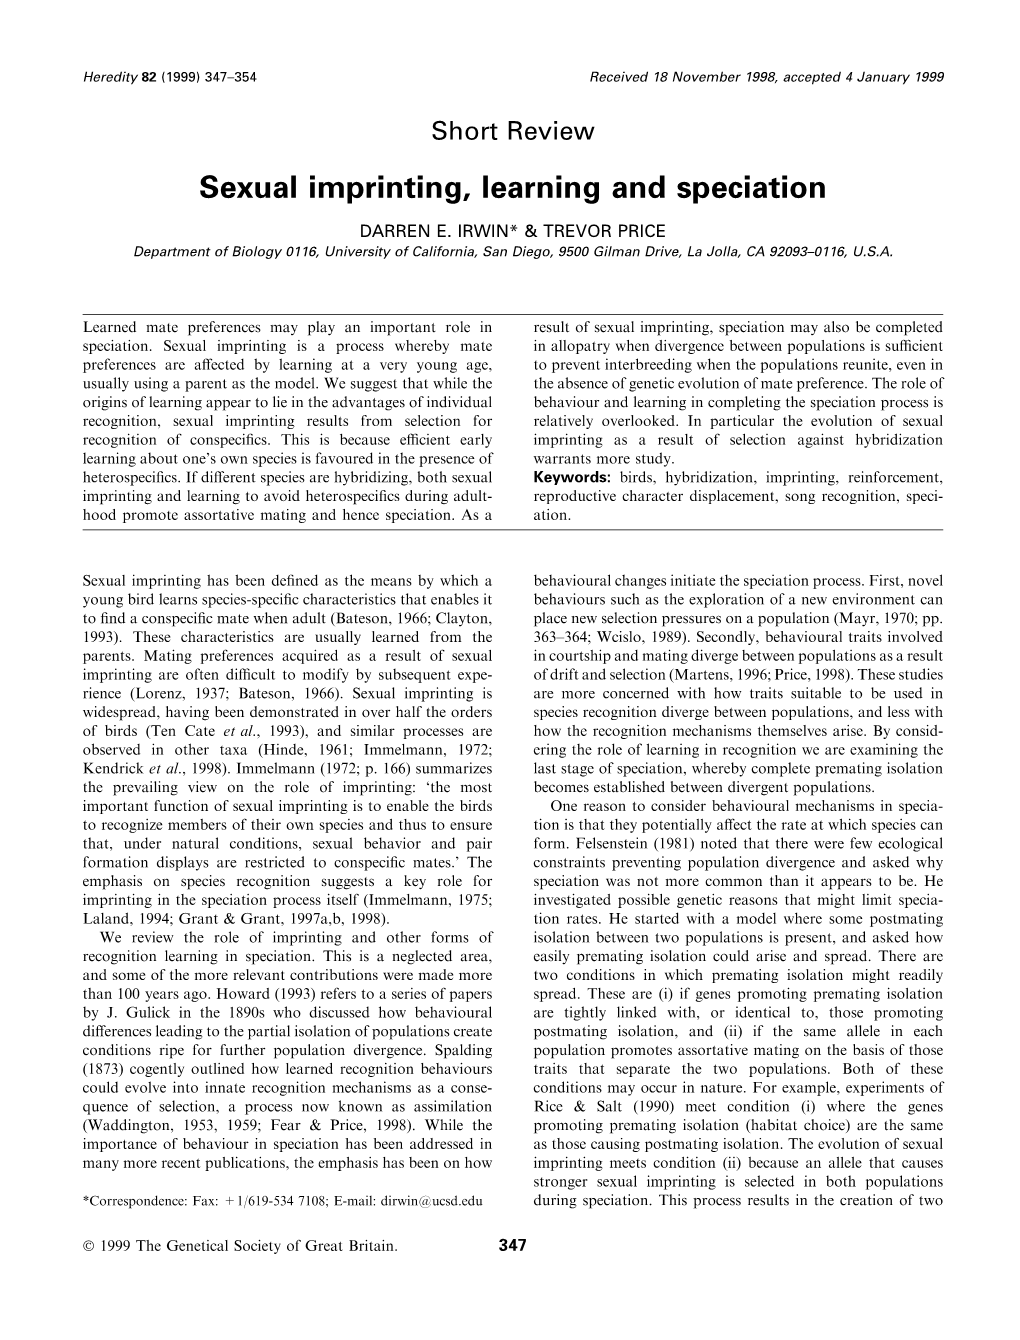 Sexual Imprinting, Learning and Speciation